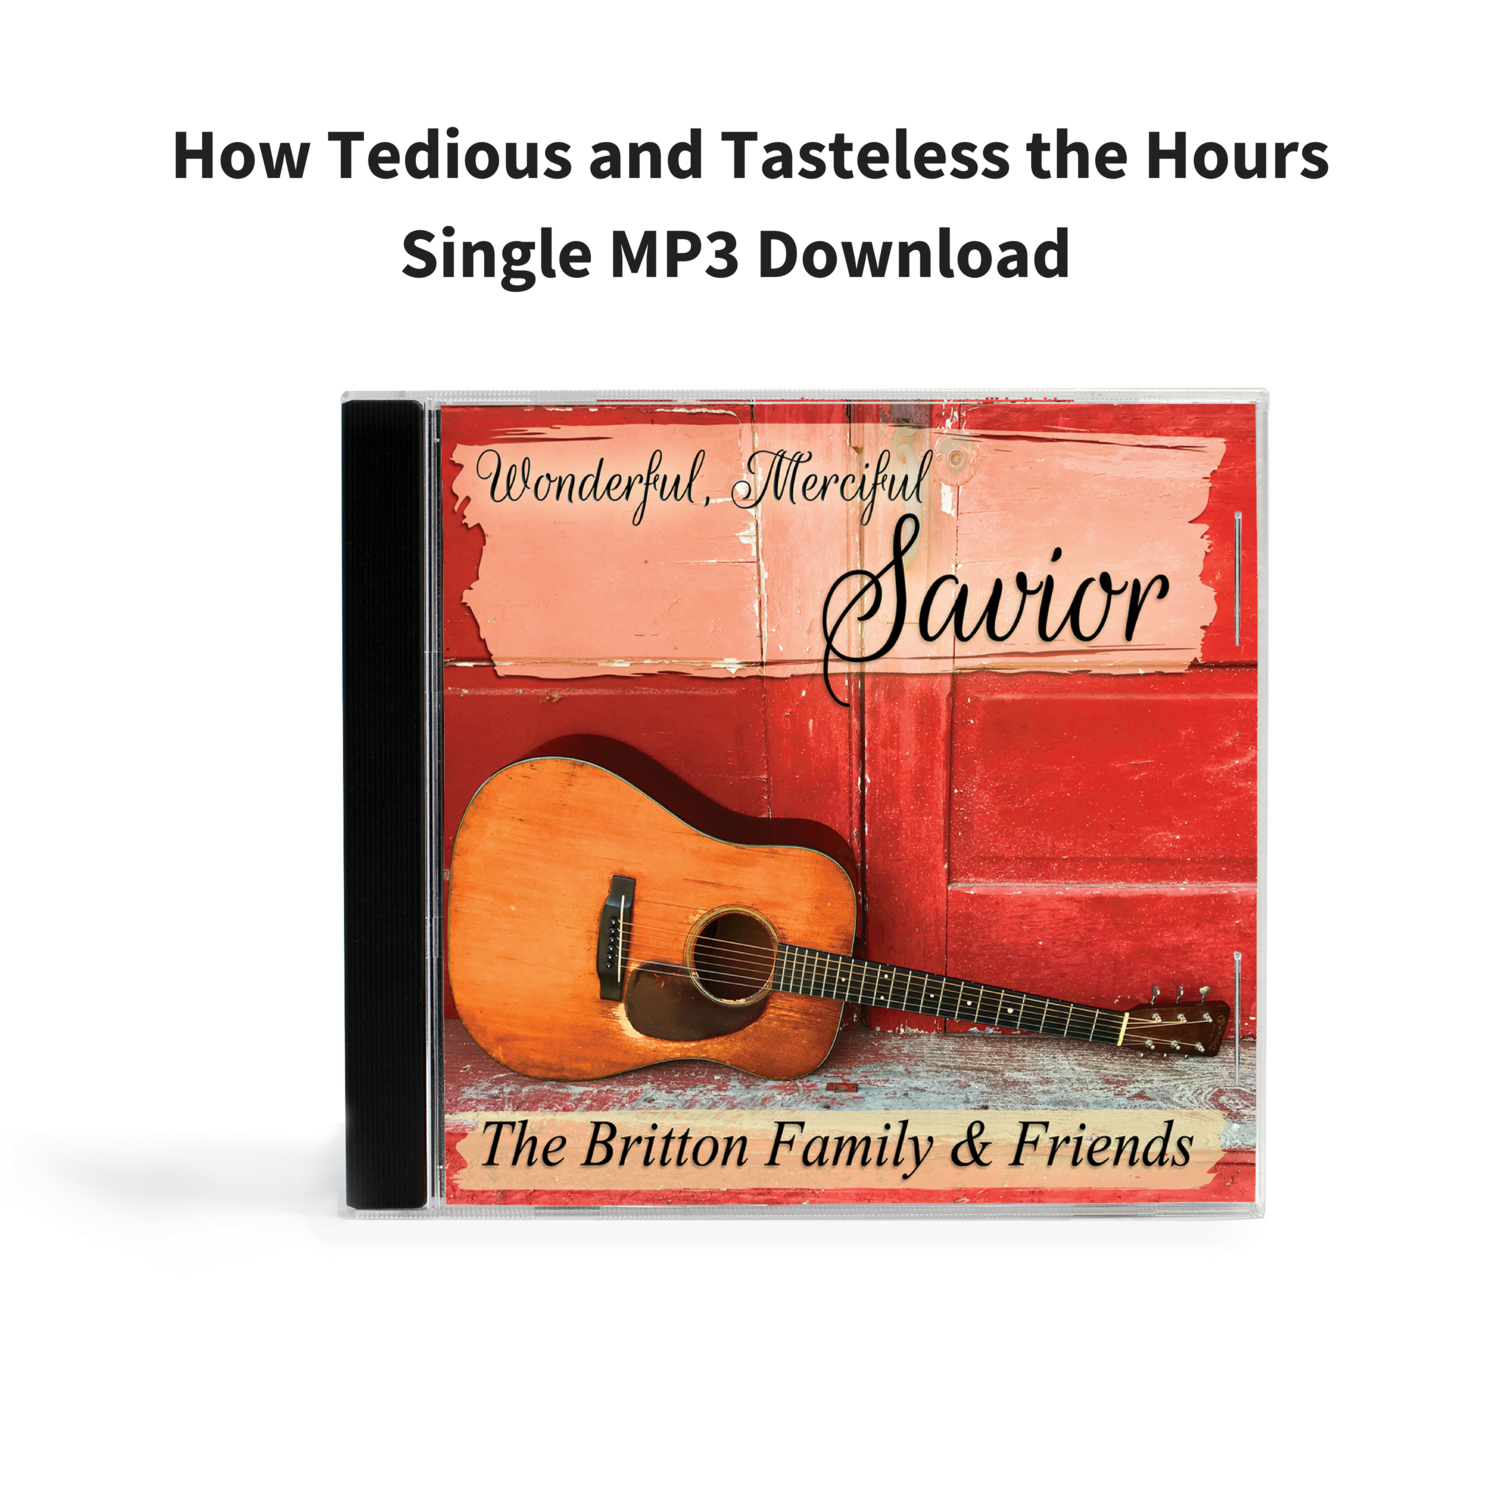 How Tedious and Tasteless the Hours - Single MP3 Download